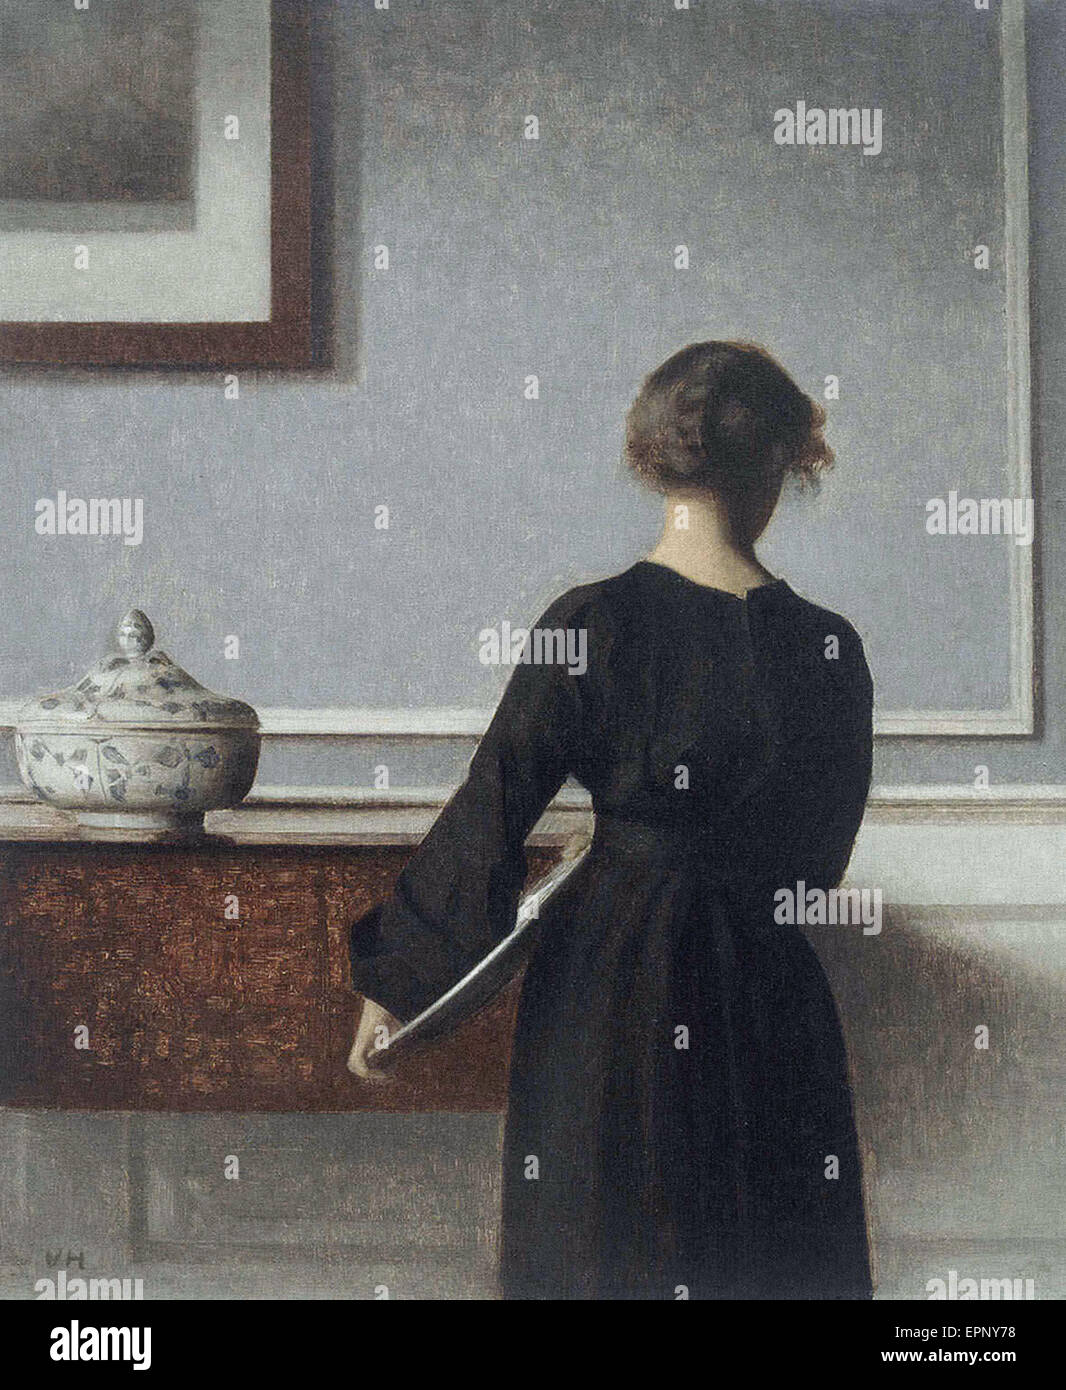 Vilhelm Hammershoi  Interior with Young Woman from Behind Stock Photo